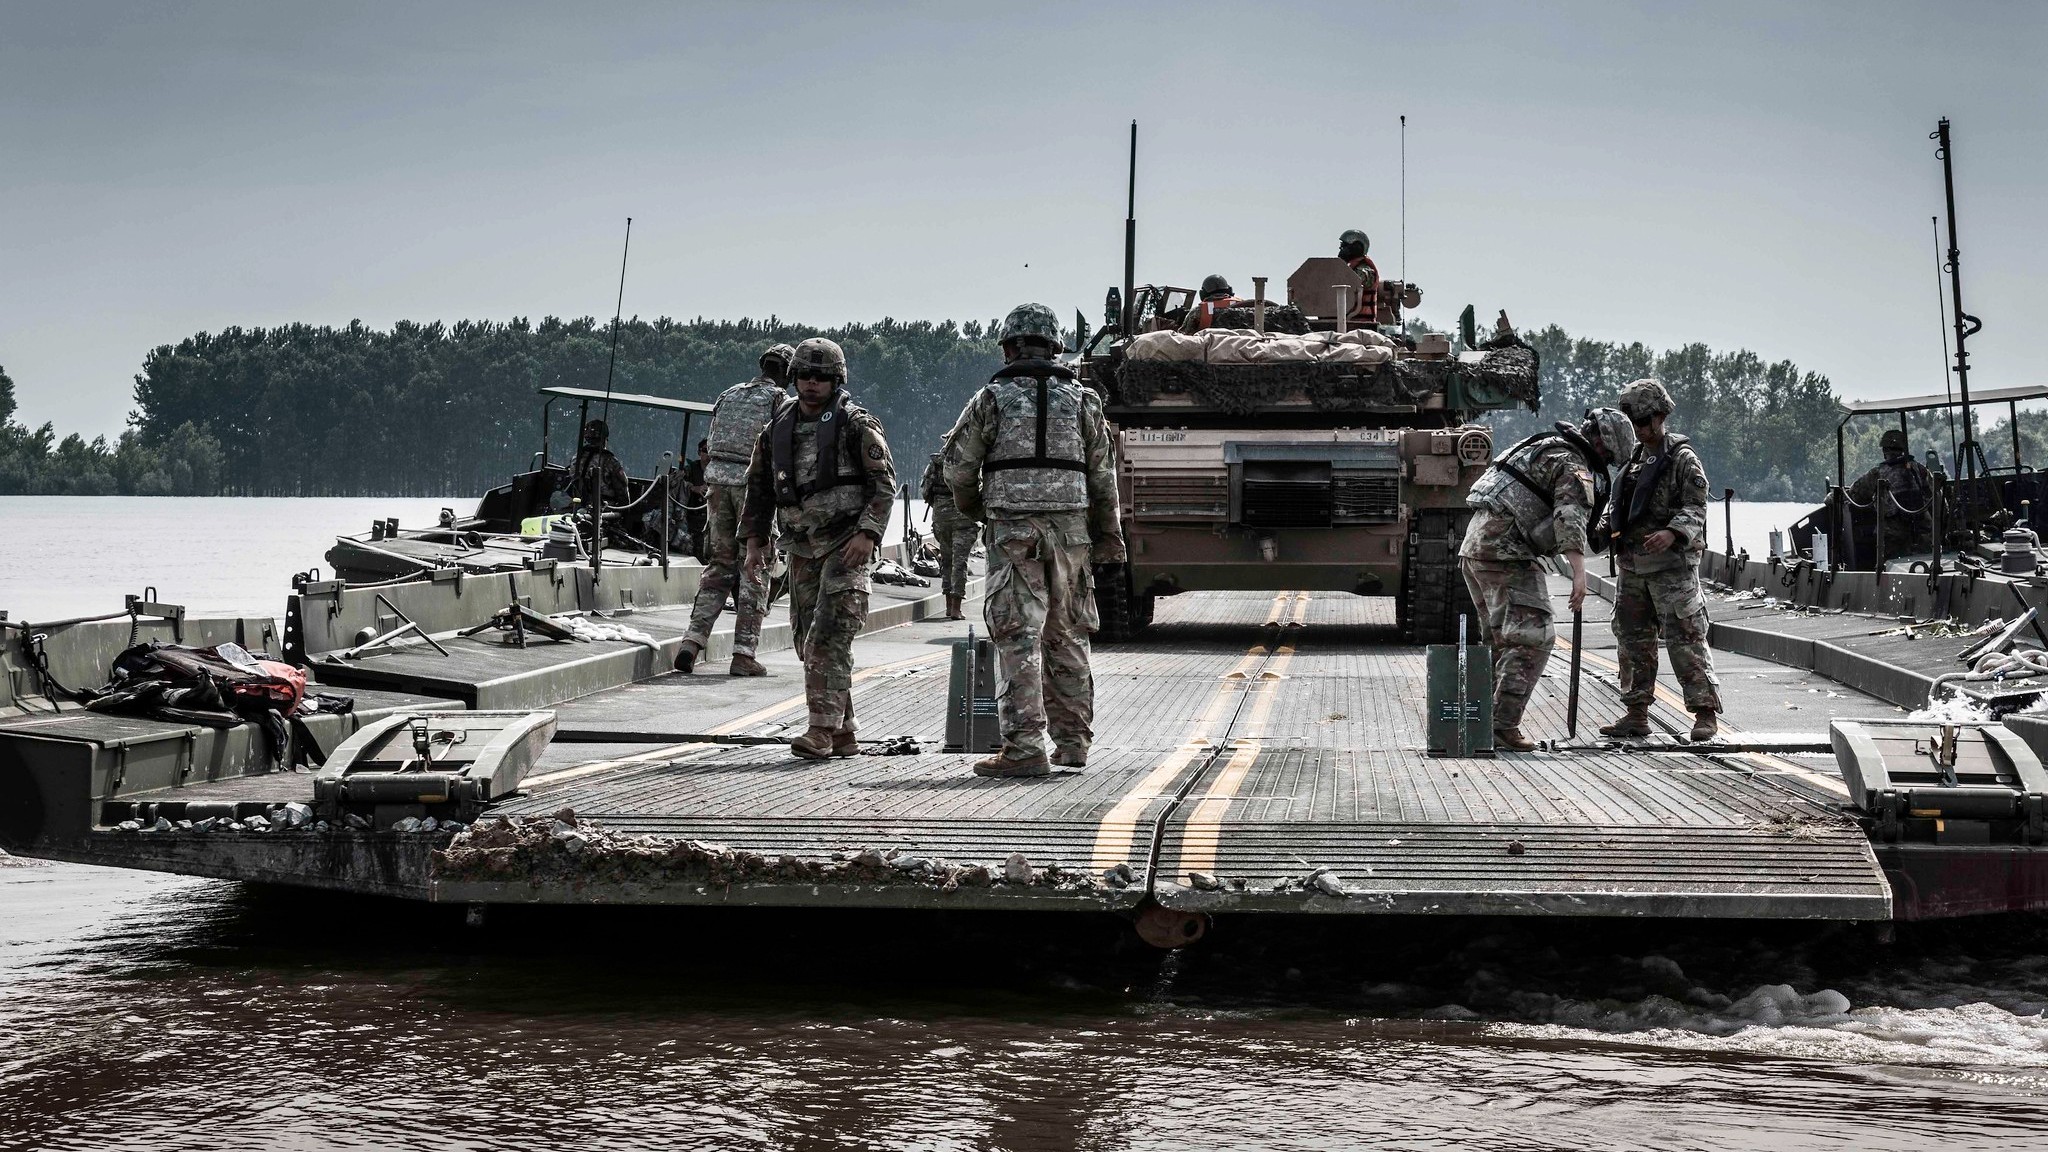 Photo: A U.S. Army M1 Abrams tank is transported across the Danube River in Romania during Exercise Saber Guardian 2019. The exercise includes more than 8,000 soldiers from six NATO Allied and partner nations. It's co-led by Romanian Land Forces and U.S. Army Europe. Credit: NATO